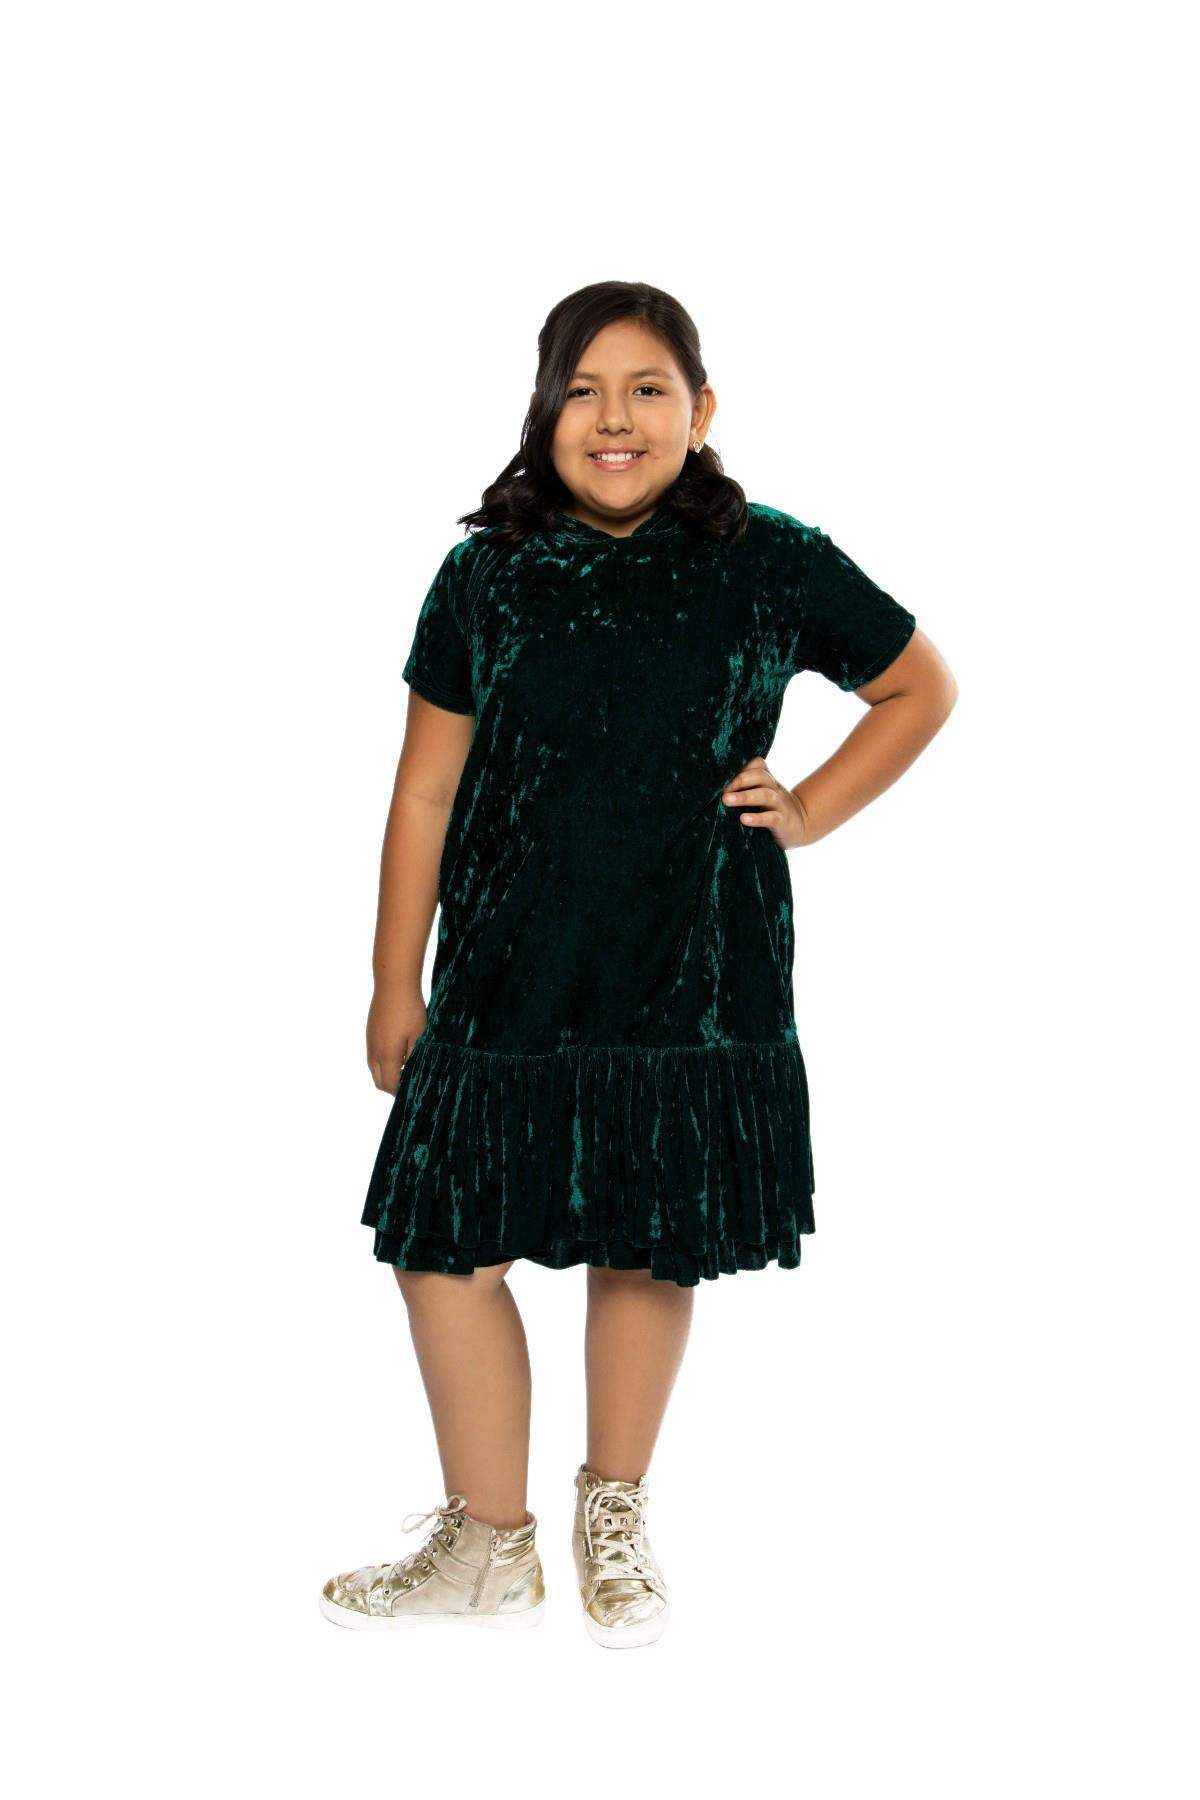 Hoodie Ruffle Plus Size Girl Dress-Kid's Dream-color_Burgundy,color_Dusty Rose,Color_Eggplant,Color_Green,color_Royal Blue,color_Teal Blue,fabric_Velvet,length_Knee Length,Pink-collection,size _18.5,size_14.5,size_16.5